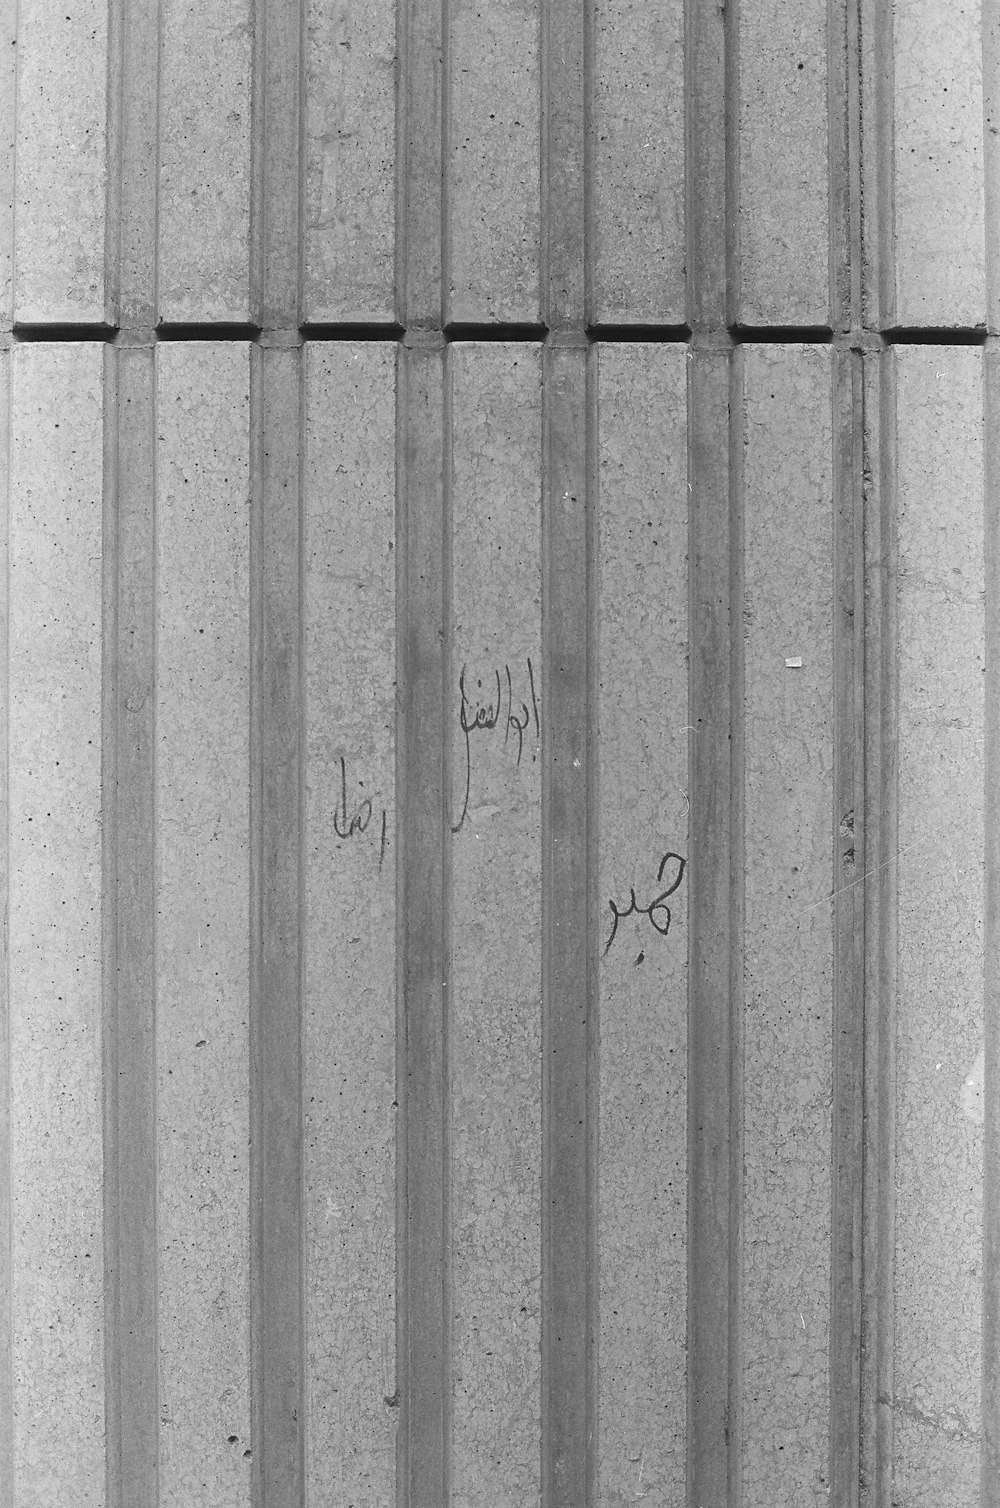 a black and white photo of a wall with writing on it